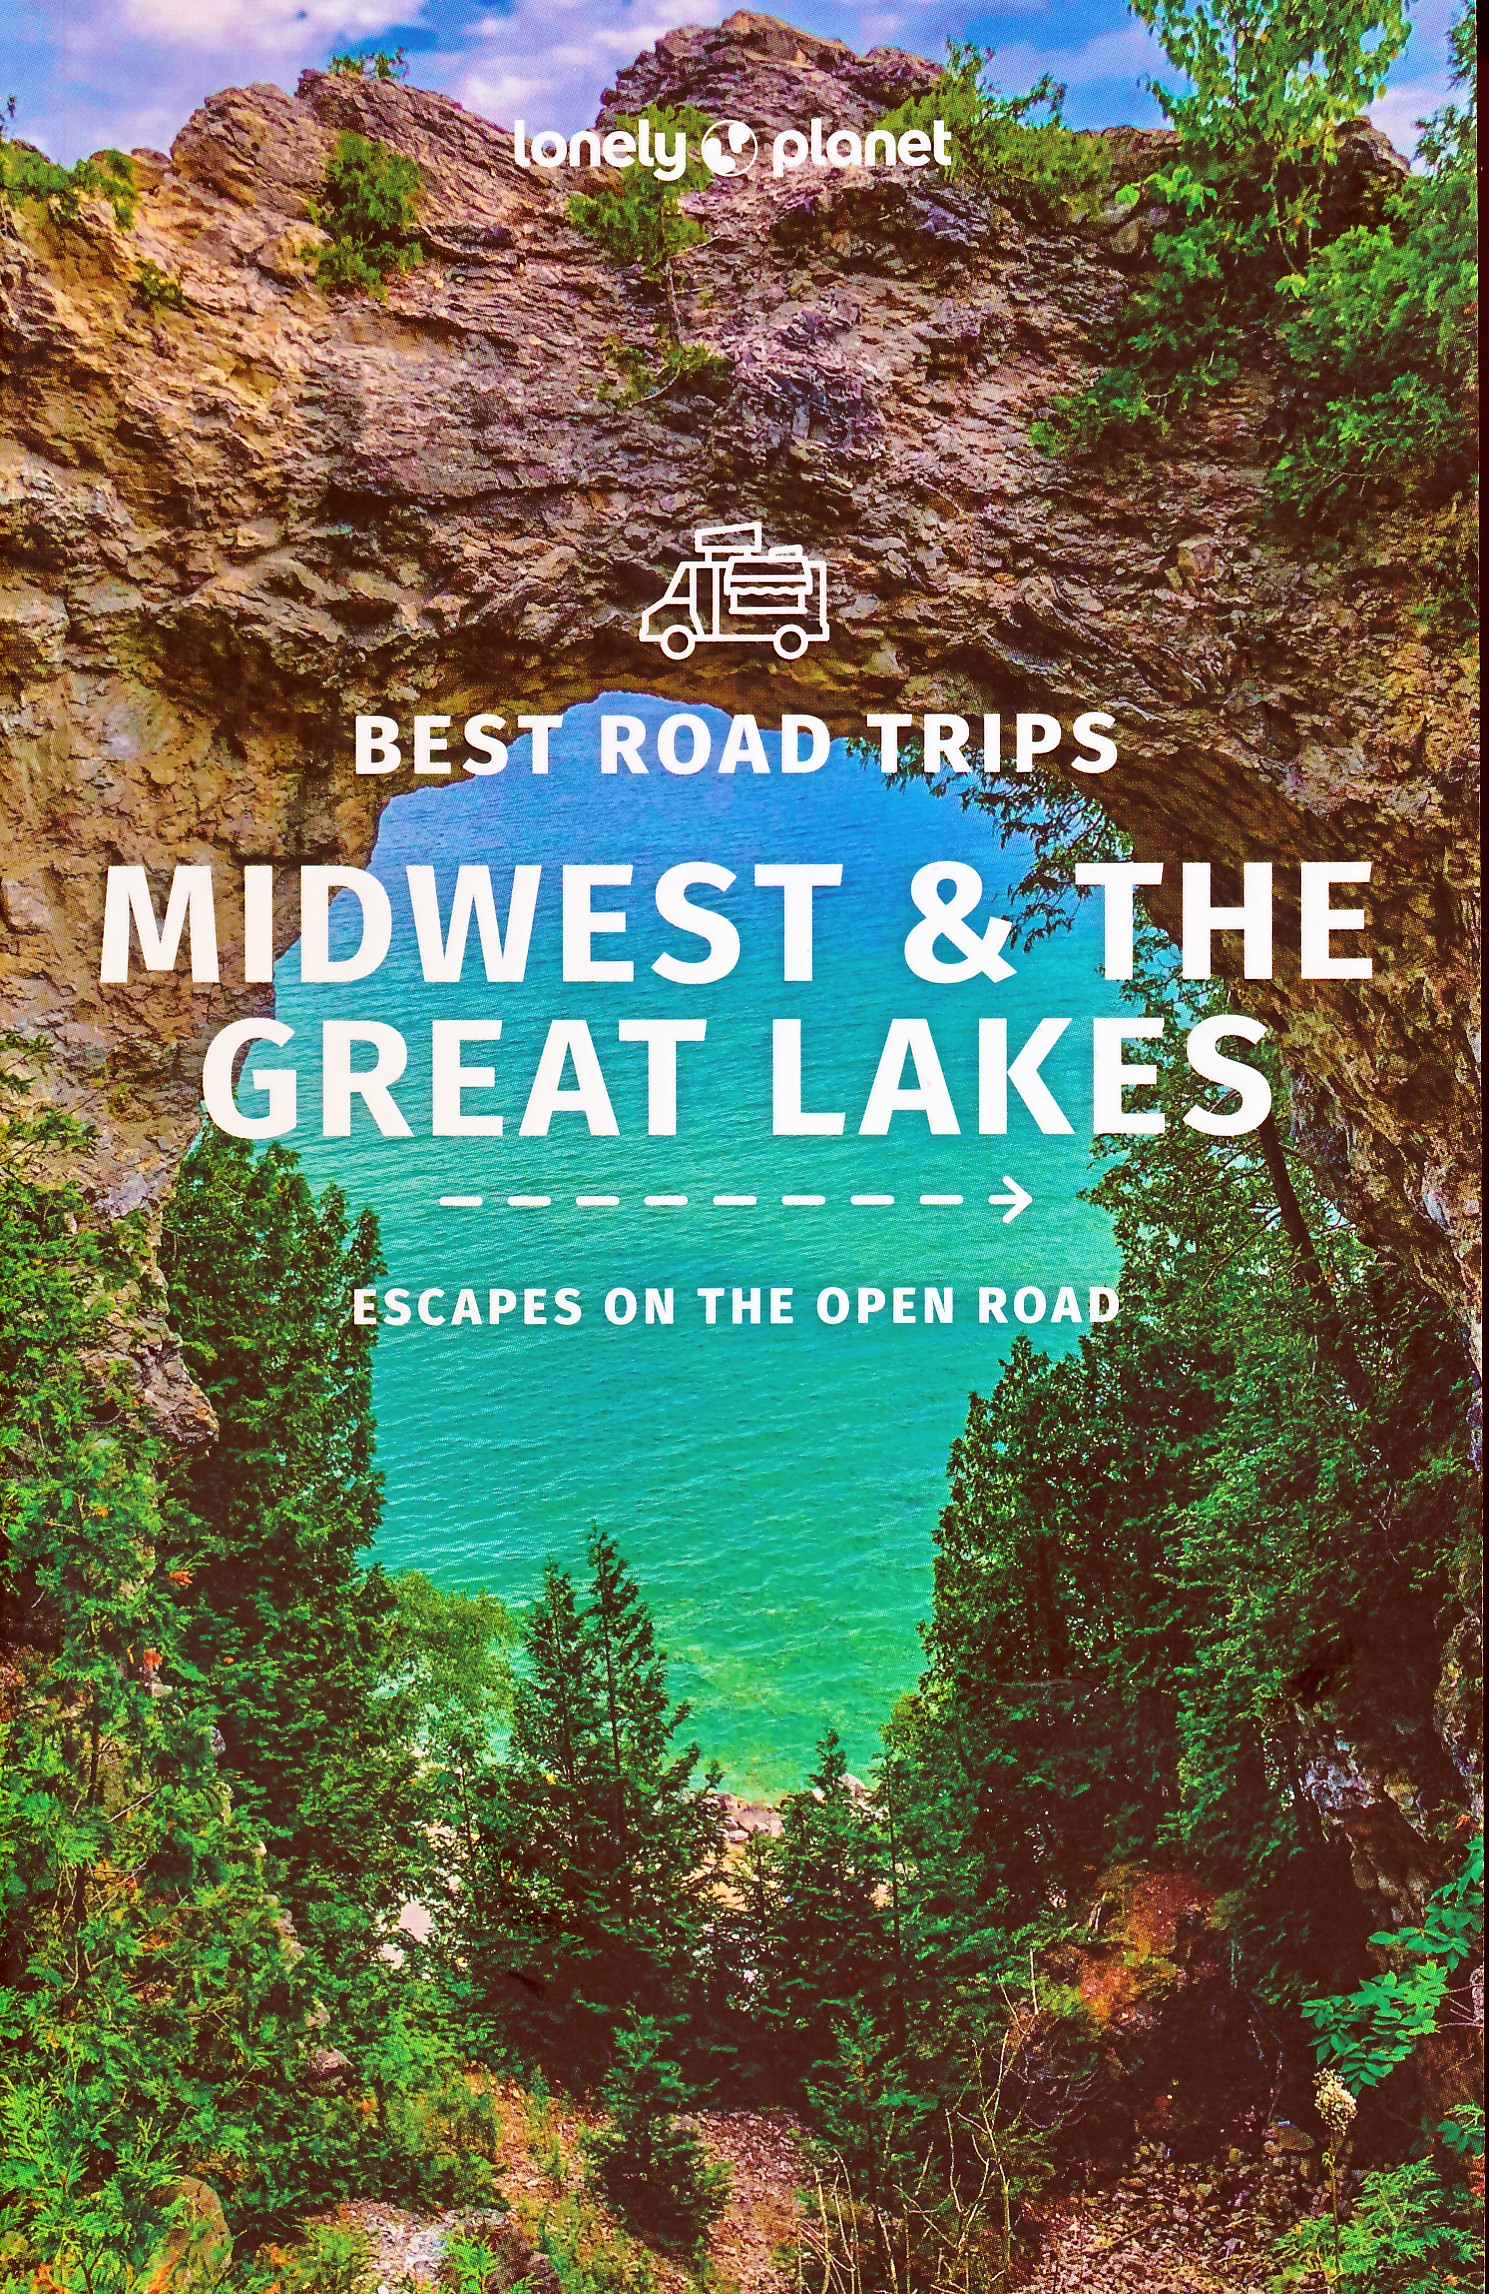 Online bestellen: Reisgids Best Road Trips Midwest and the Great Lakes - USA | Lonely Planet